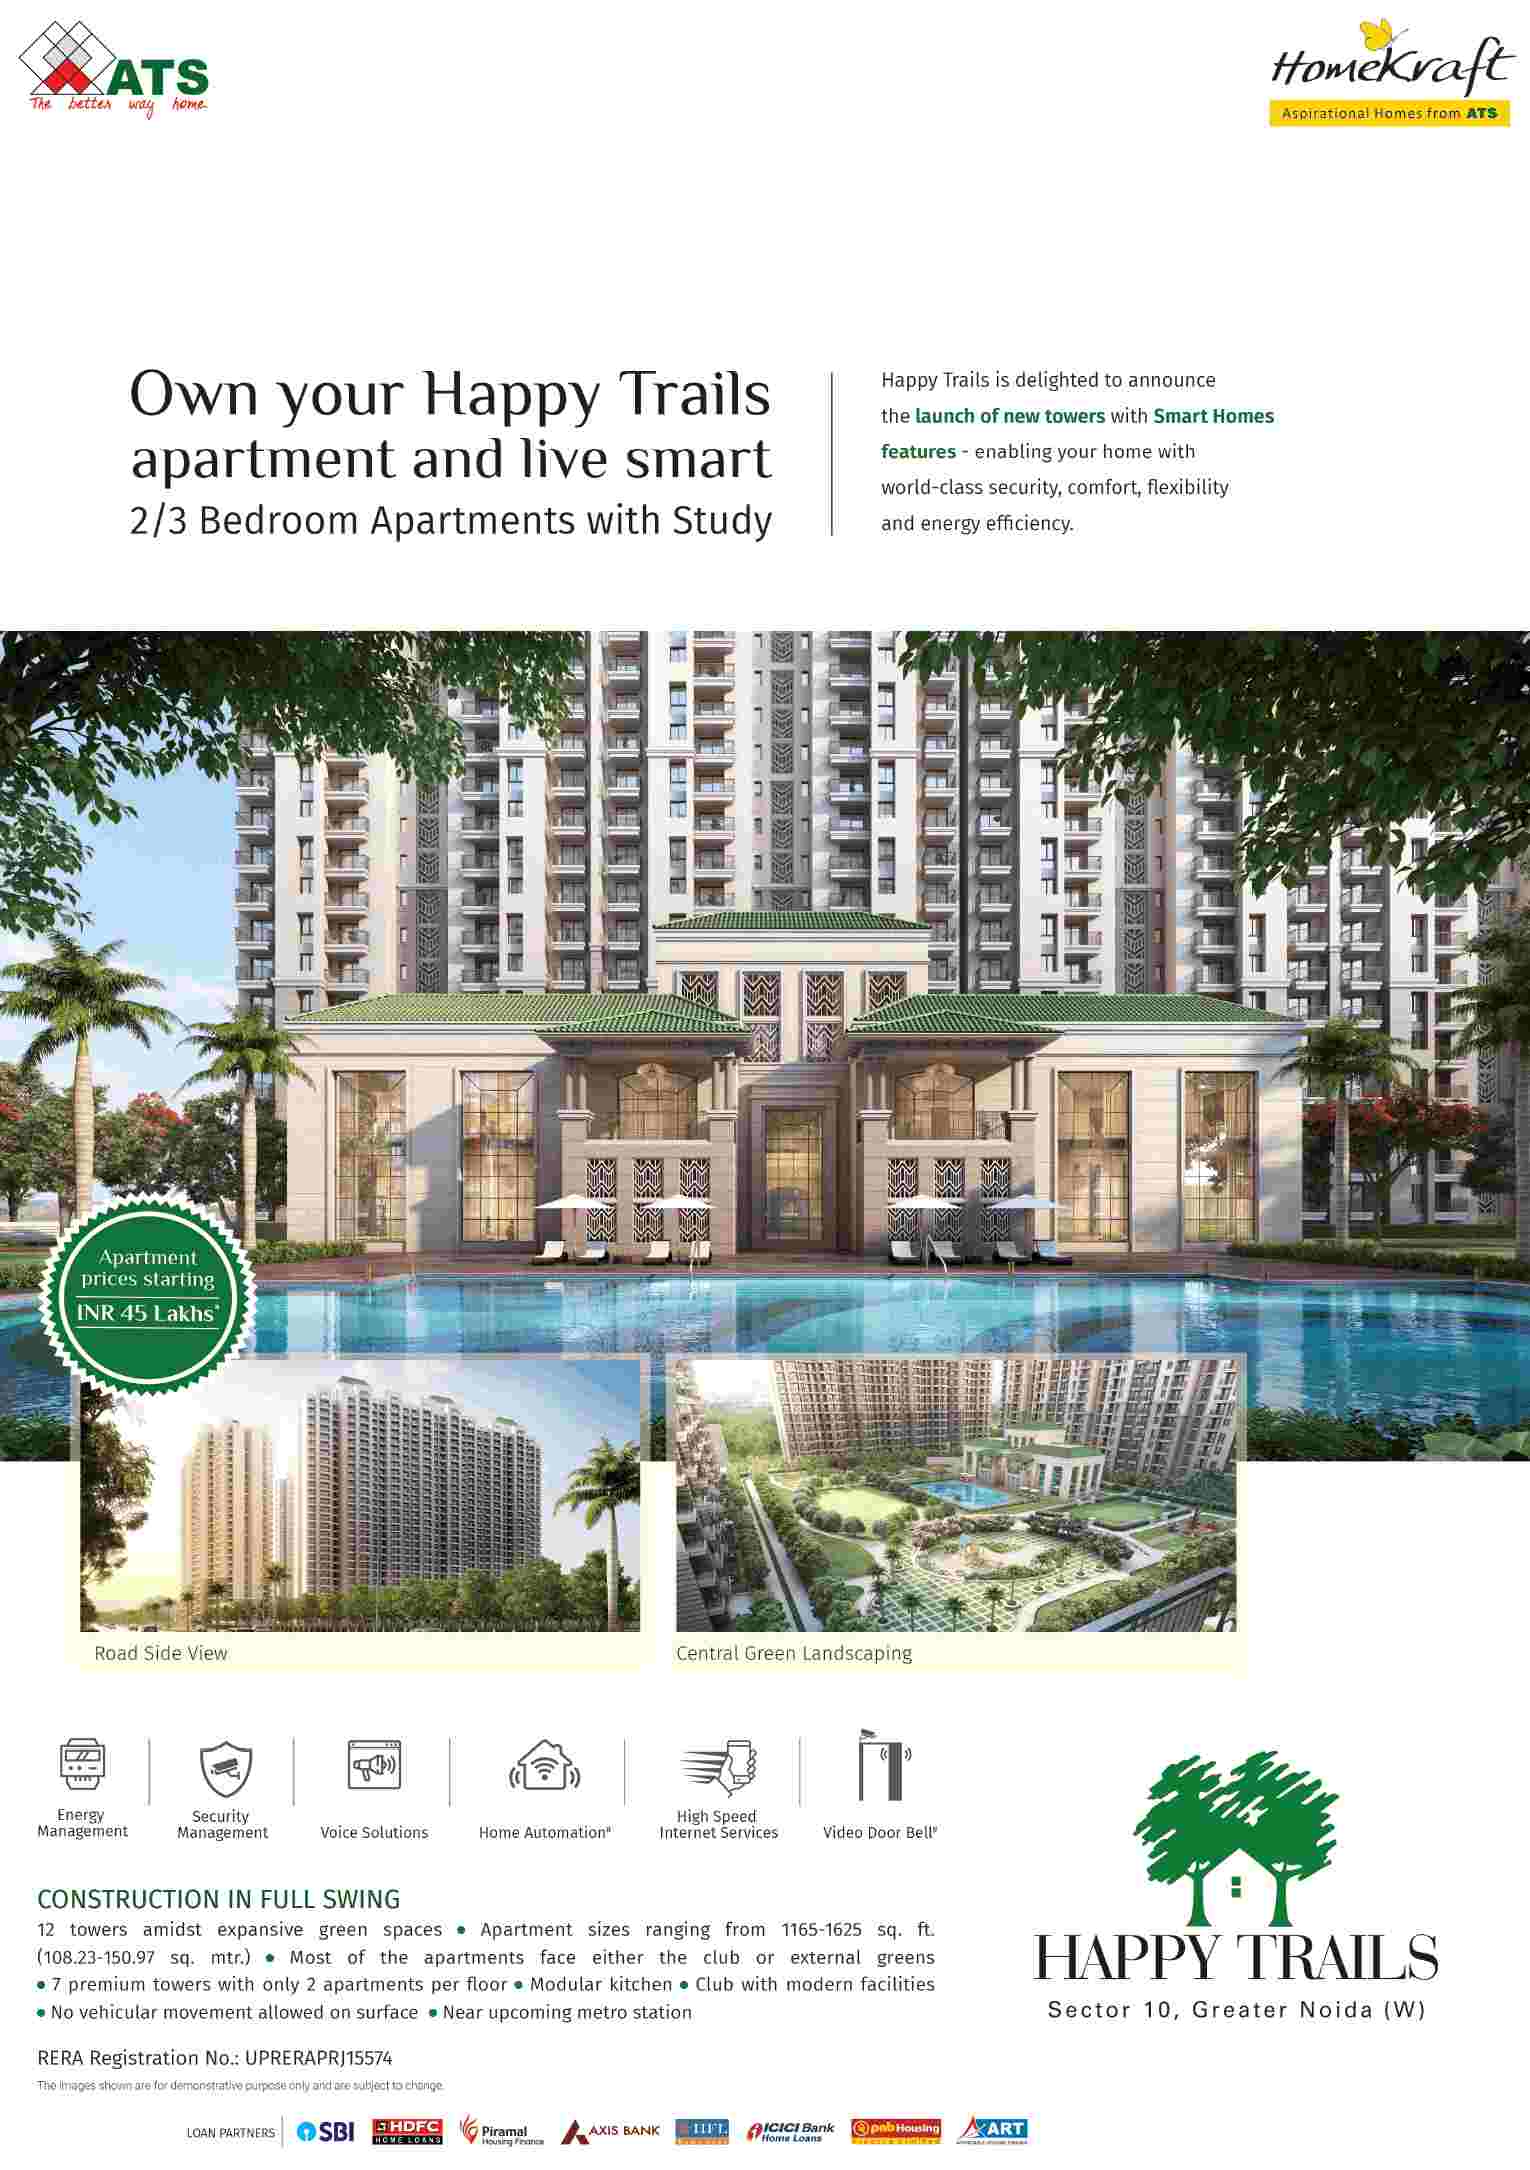 Live smart by owning an apartment at ATS HomeKraft Happy Trails in Sector 10, Greater Noida Update